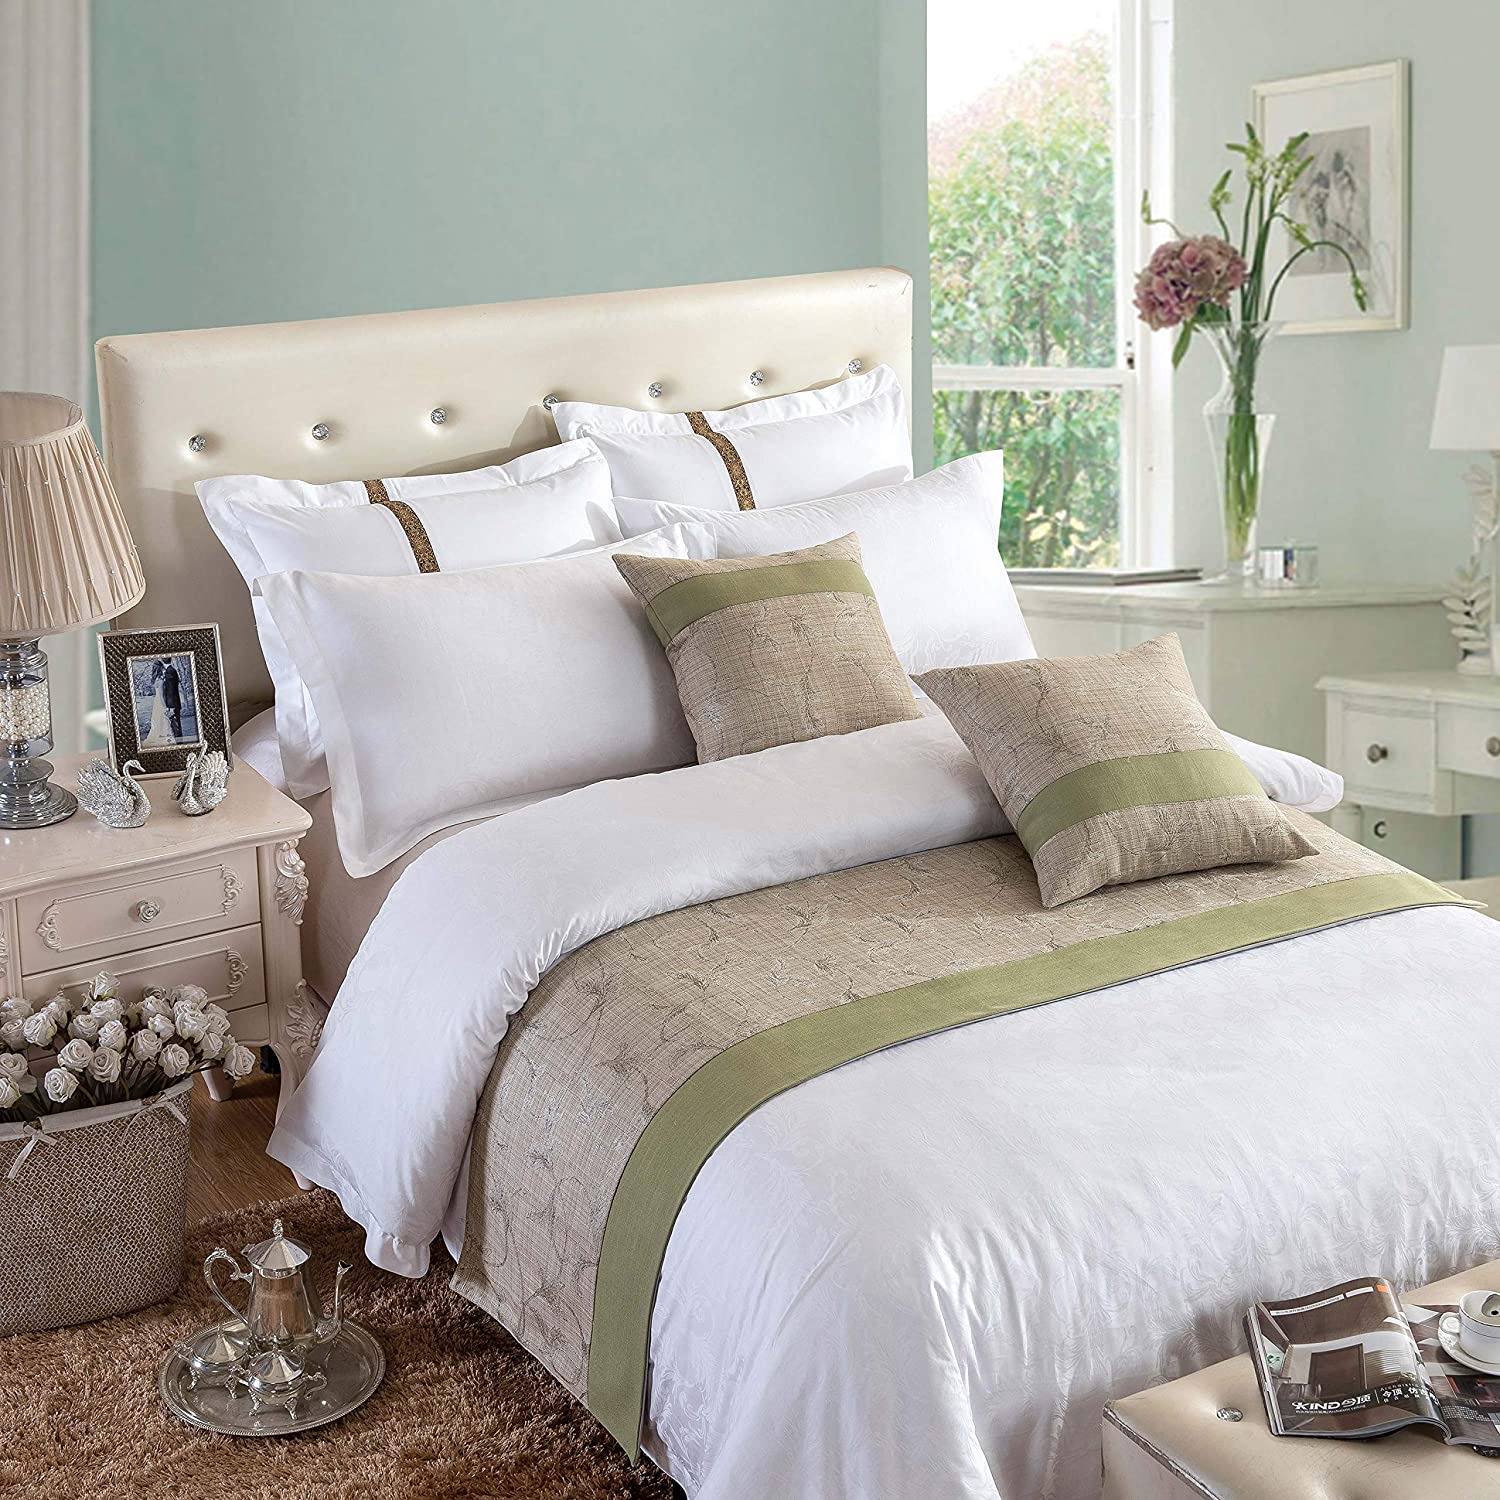 15 Bed Linen Ideas to Maximize The Look of Your Bed Talkdecor